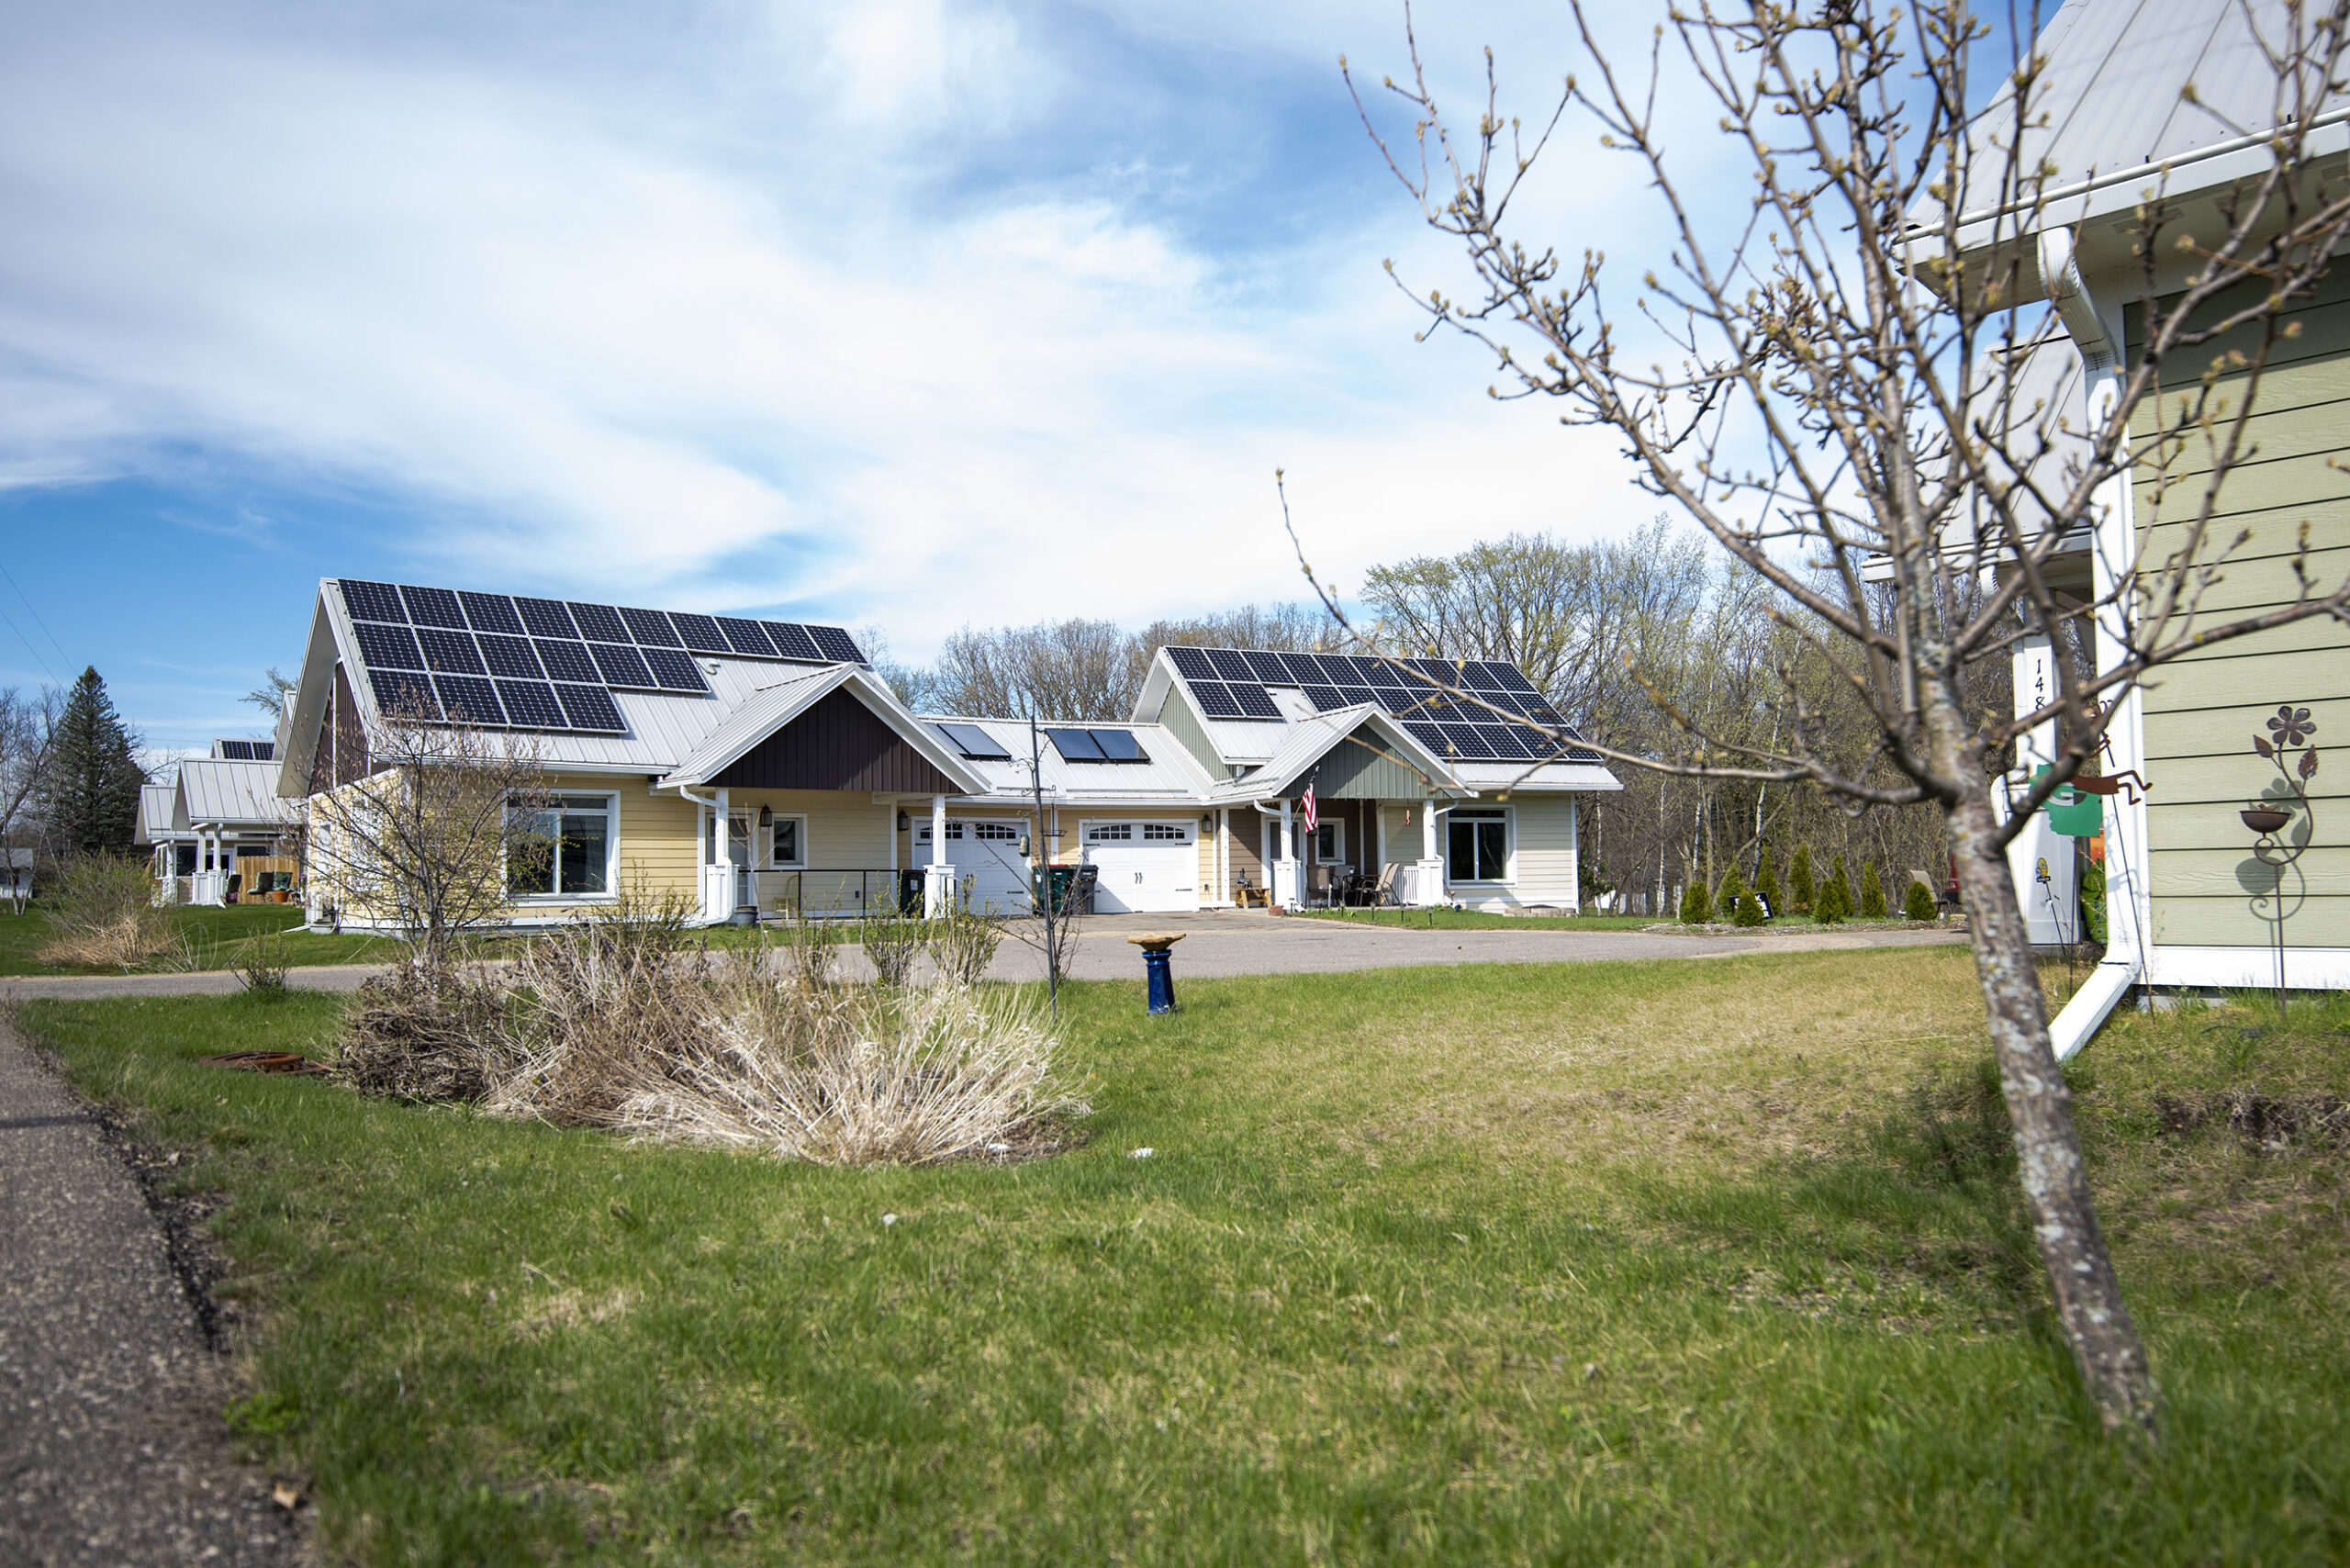 Wisconsin trails Illinois, Minnesota on solar adoption. Advocates say policy changes could help turn the tide